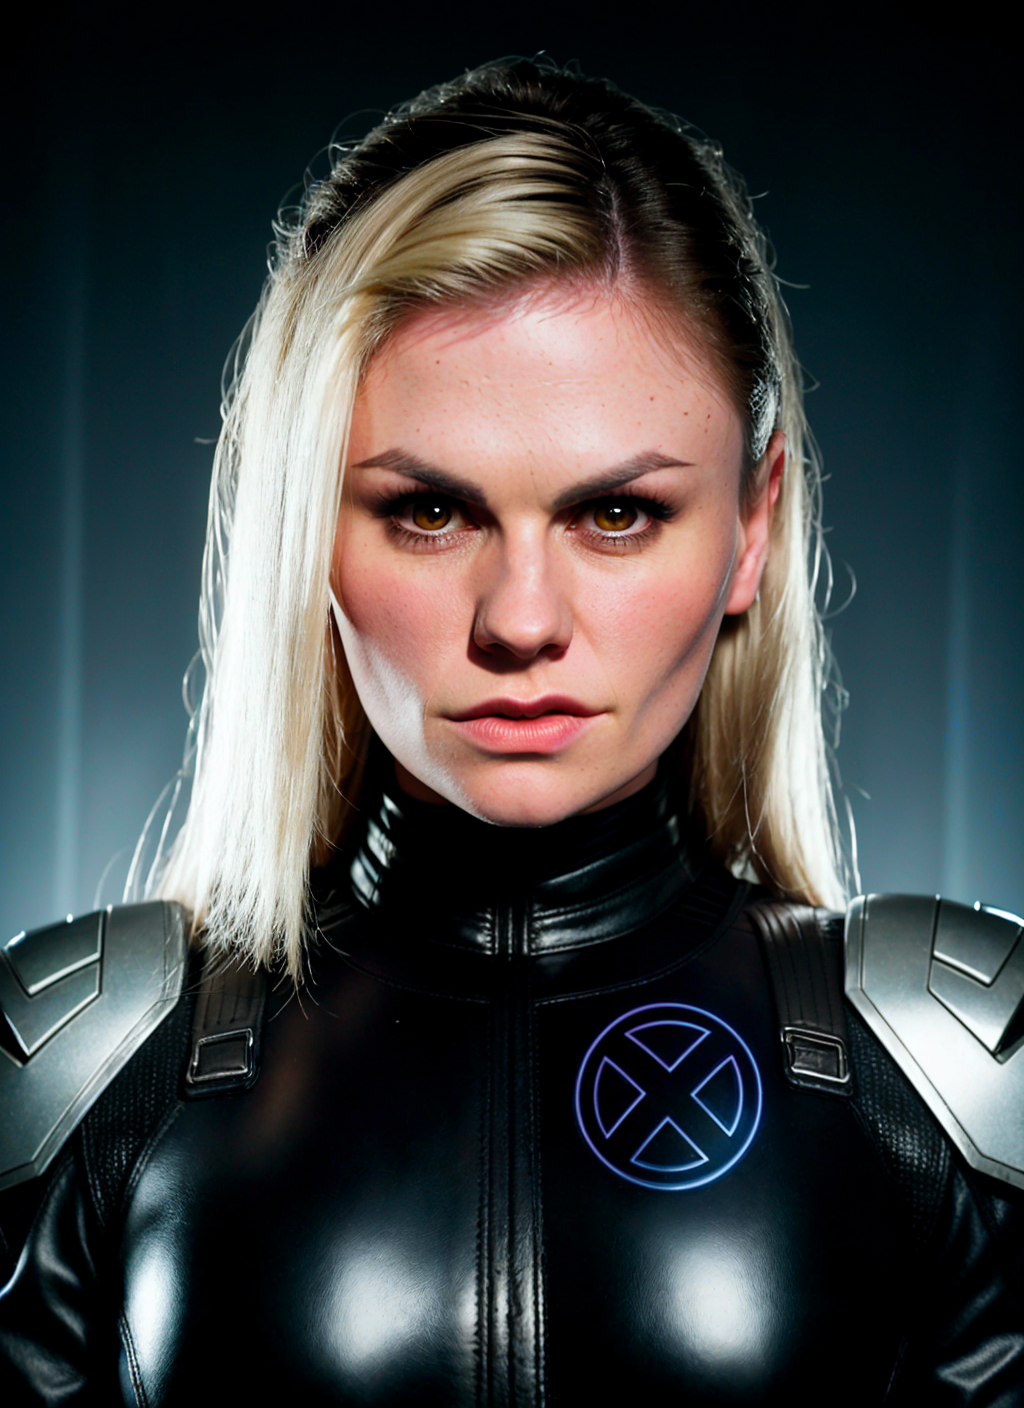 Anna Paquin (Marvel's X-Men's Rogue and Sookie Stackhouse from True Blood TV show) image by astragartist